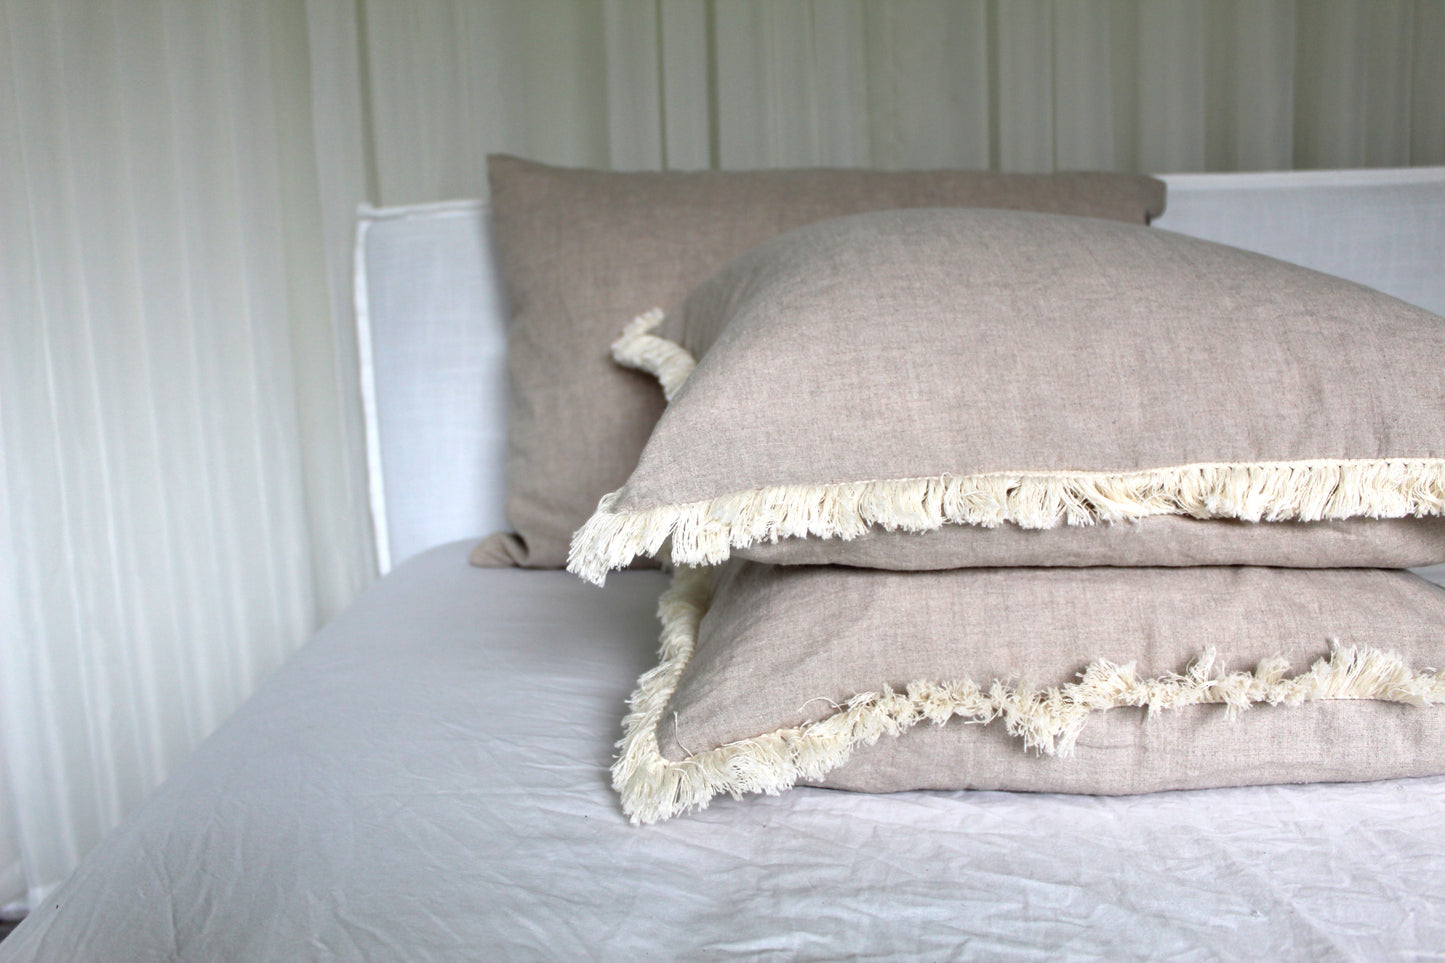 100% Linen Covers with Fringe or Plain finish. Australian made cushion covers